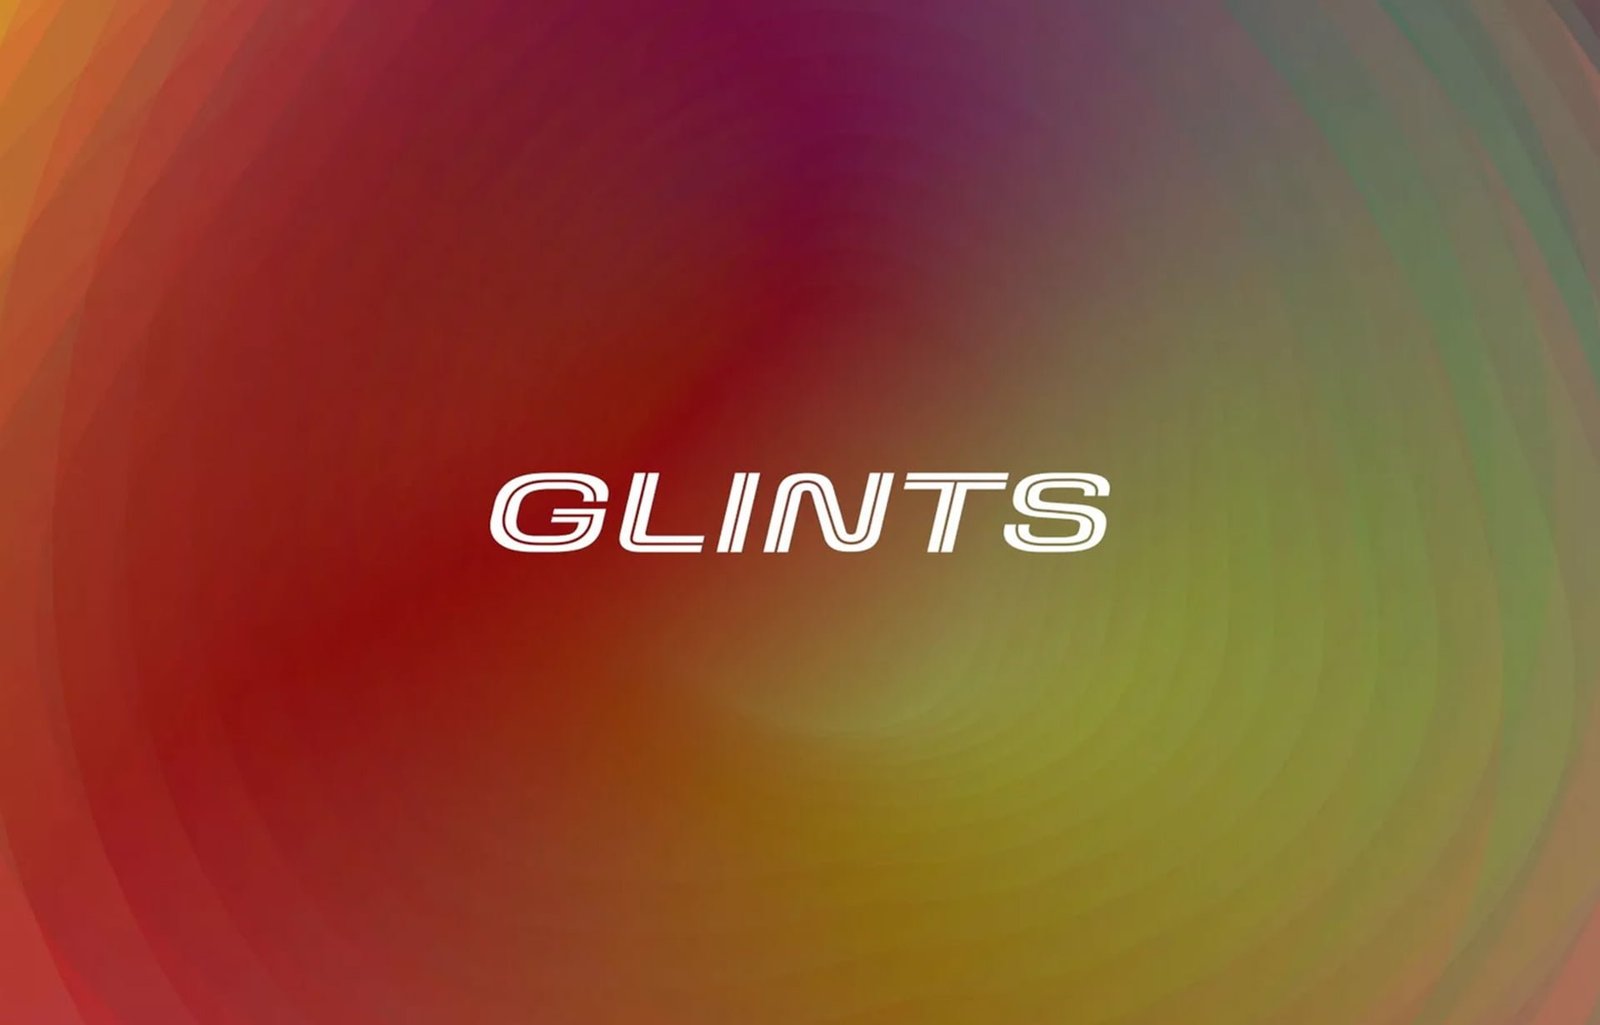 Glints by Umbel Partners